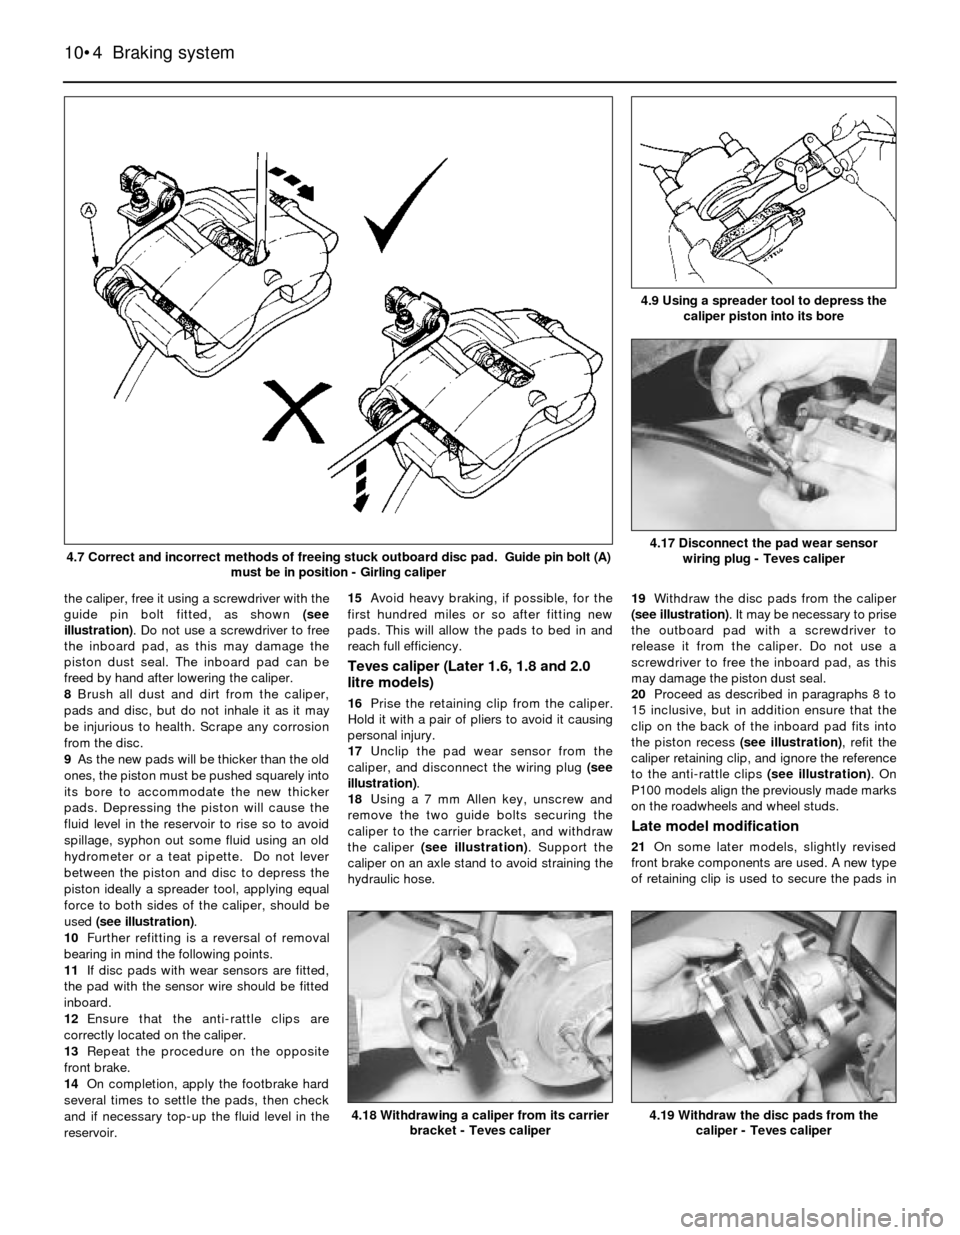 FORD SIERRA 1986 1.G Braking System Workshop Manual the caliper, free it using a screwdriver with the
guide pin bolt fitted, as shown (see
illustration). Do not use a screwdriver to free
the inboard pad, as this may damage the
piston dust seal. The inb